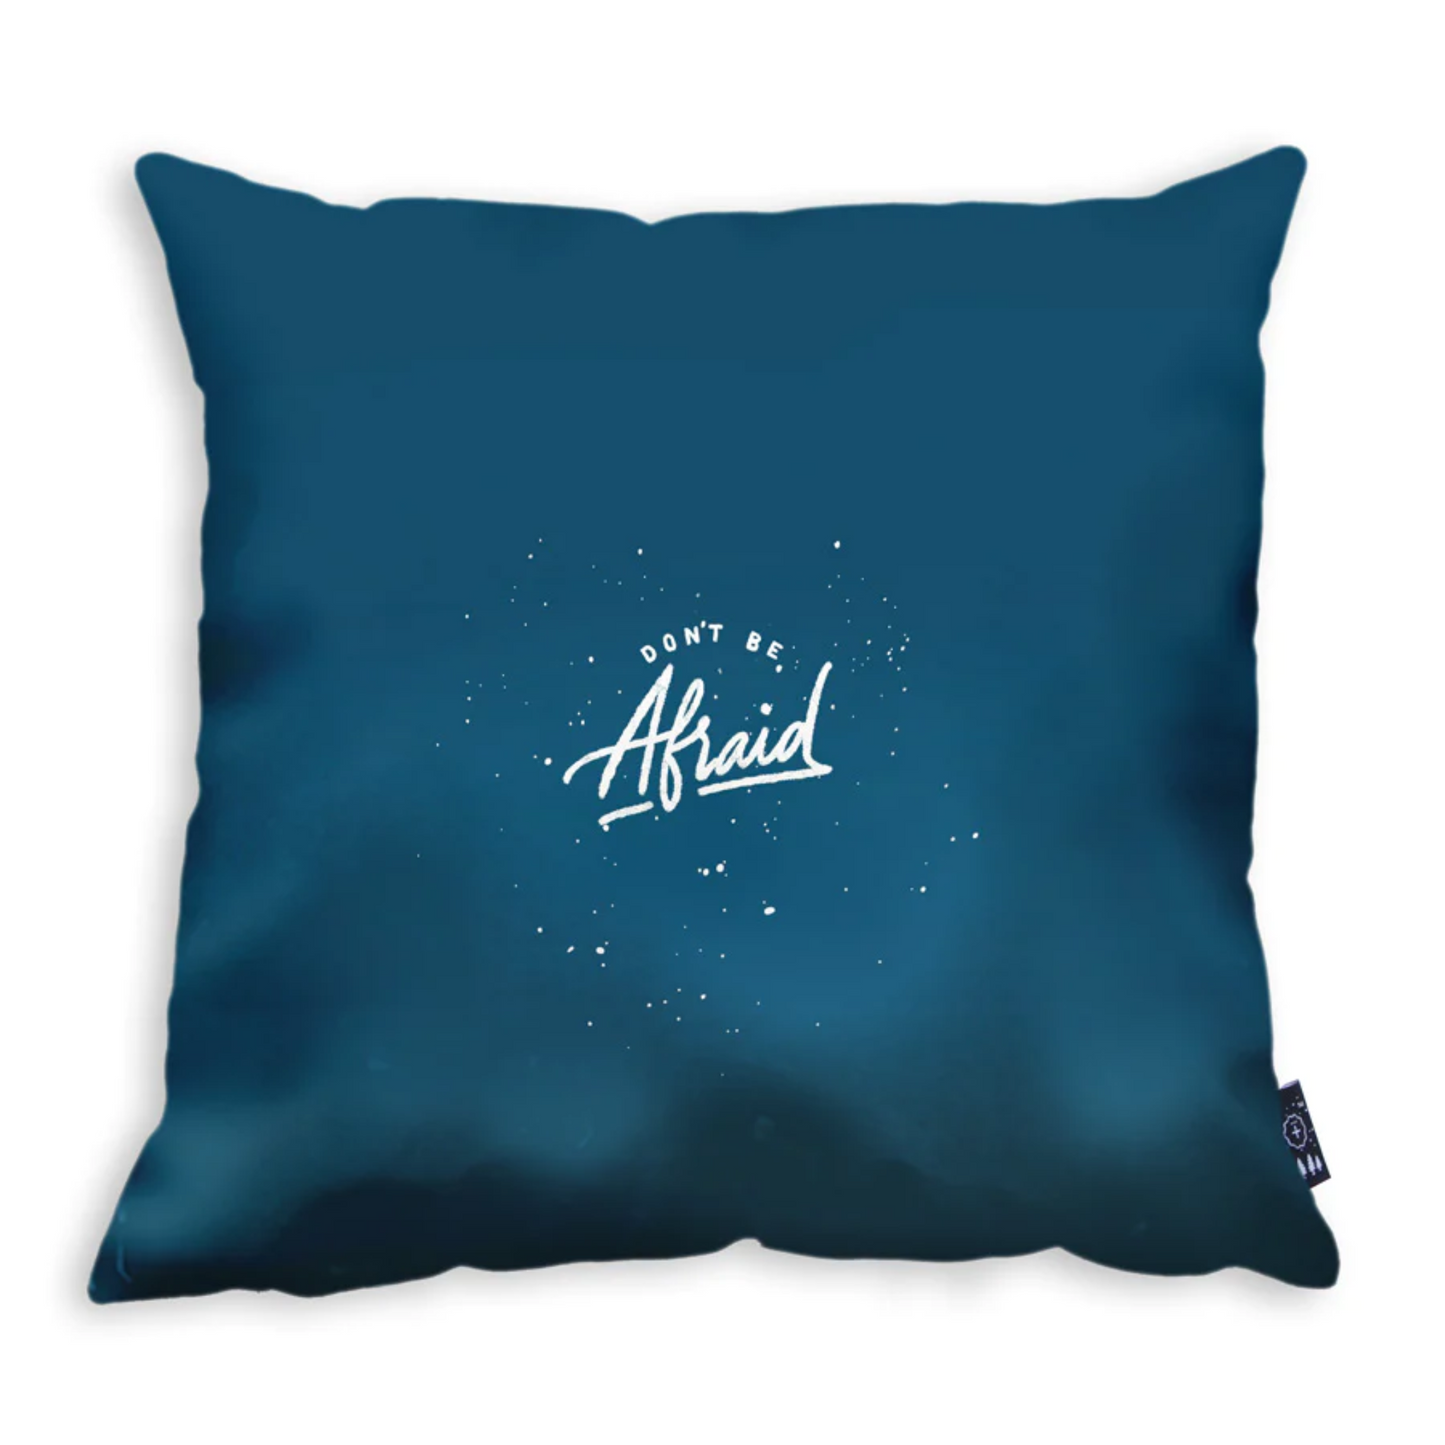 Don't be afraid, only believe - Cushion Cover